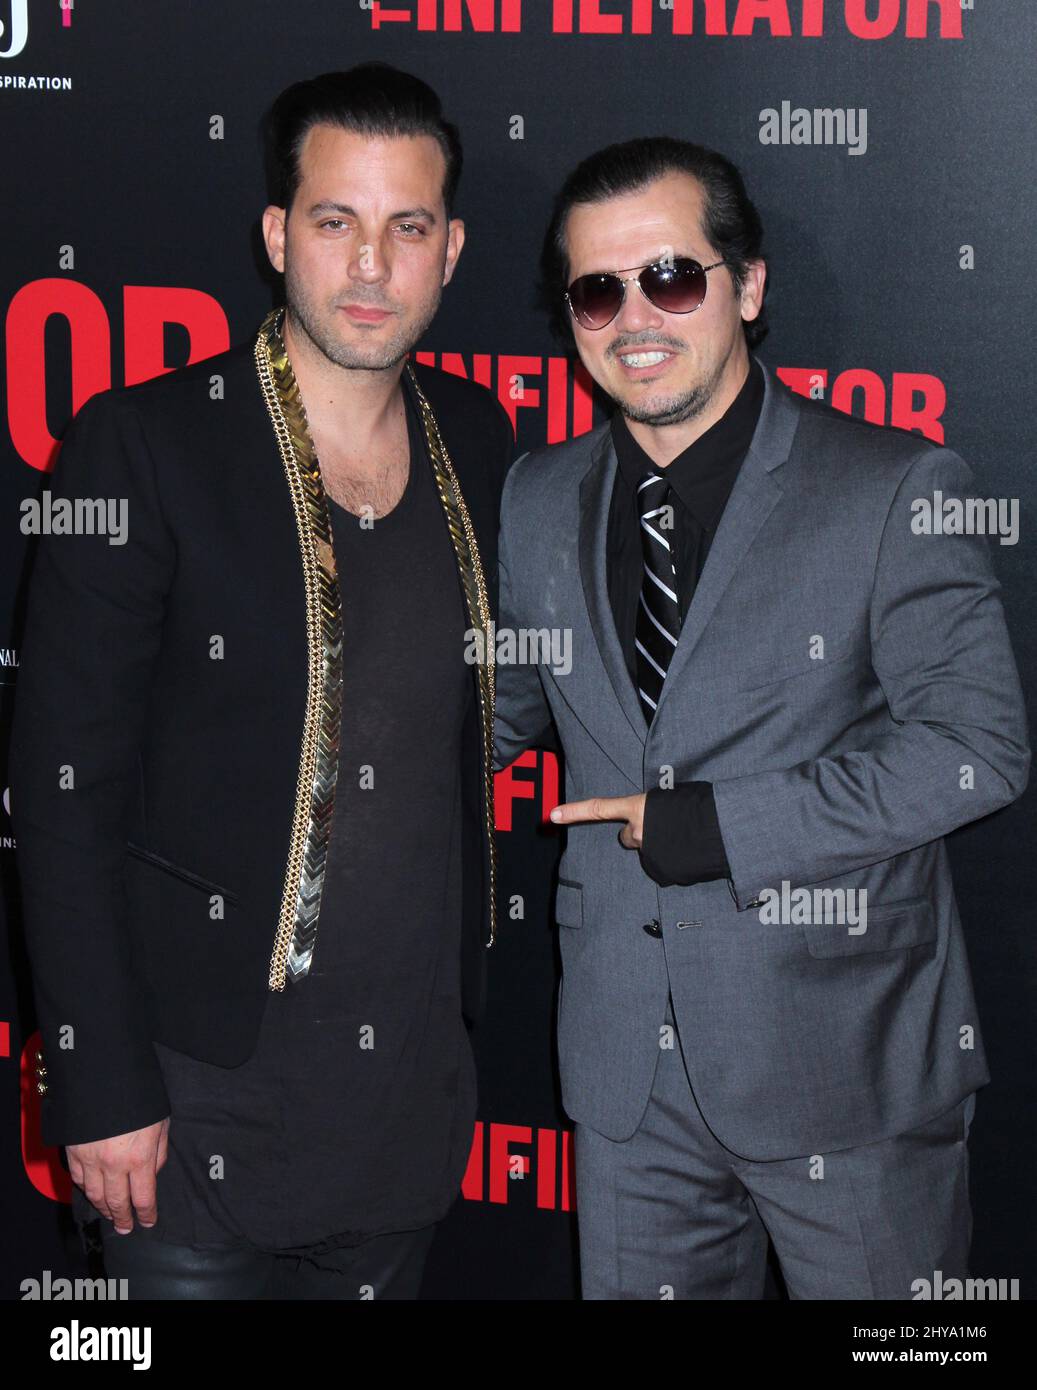 Brad Furman and John Leguizamo attending the premiere of The Infiltrator in New York. Stock Photo